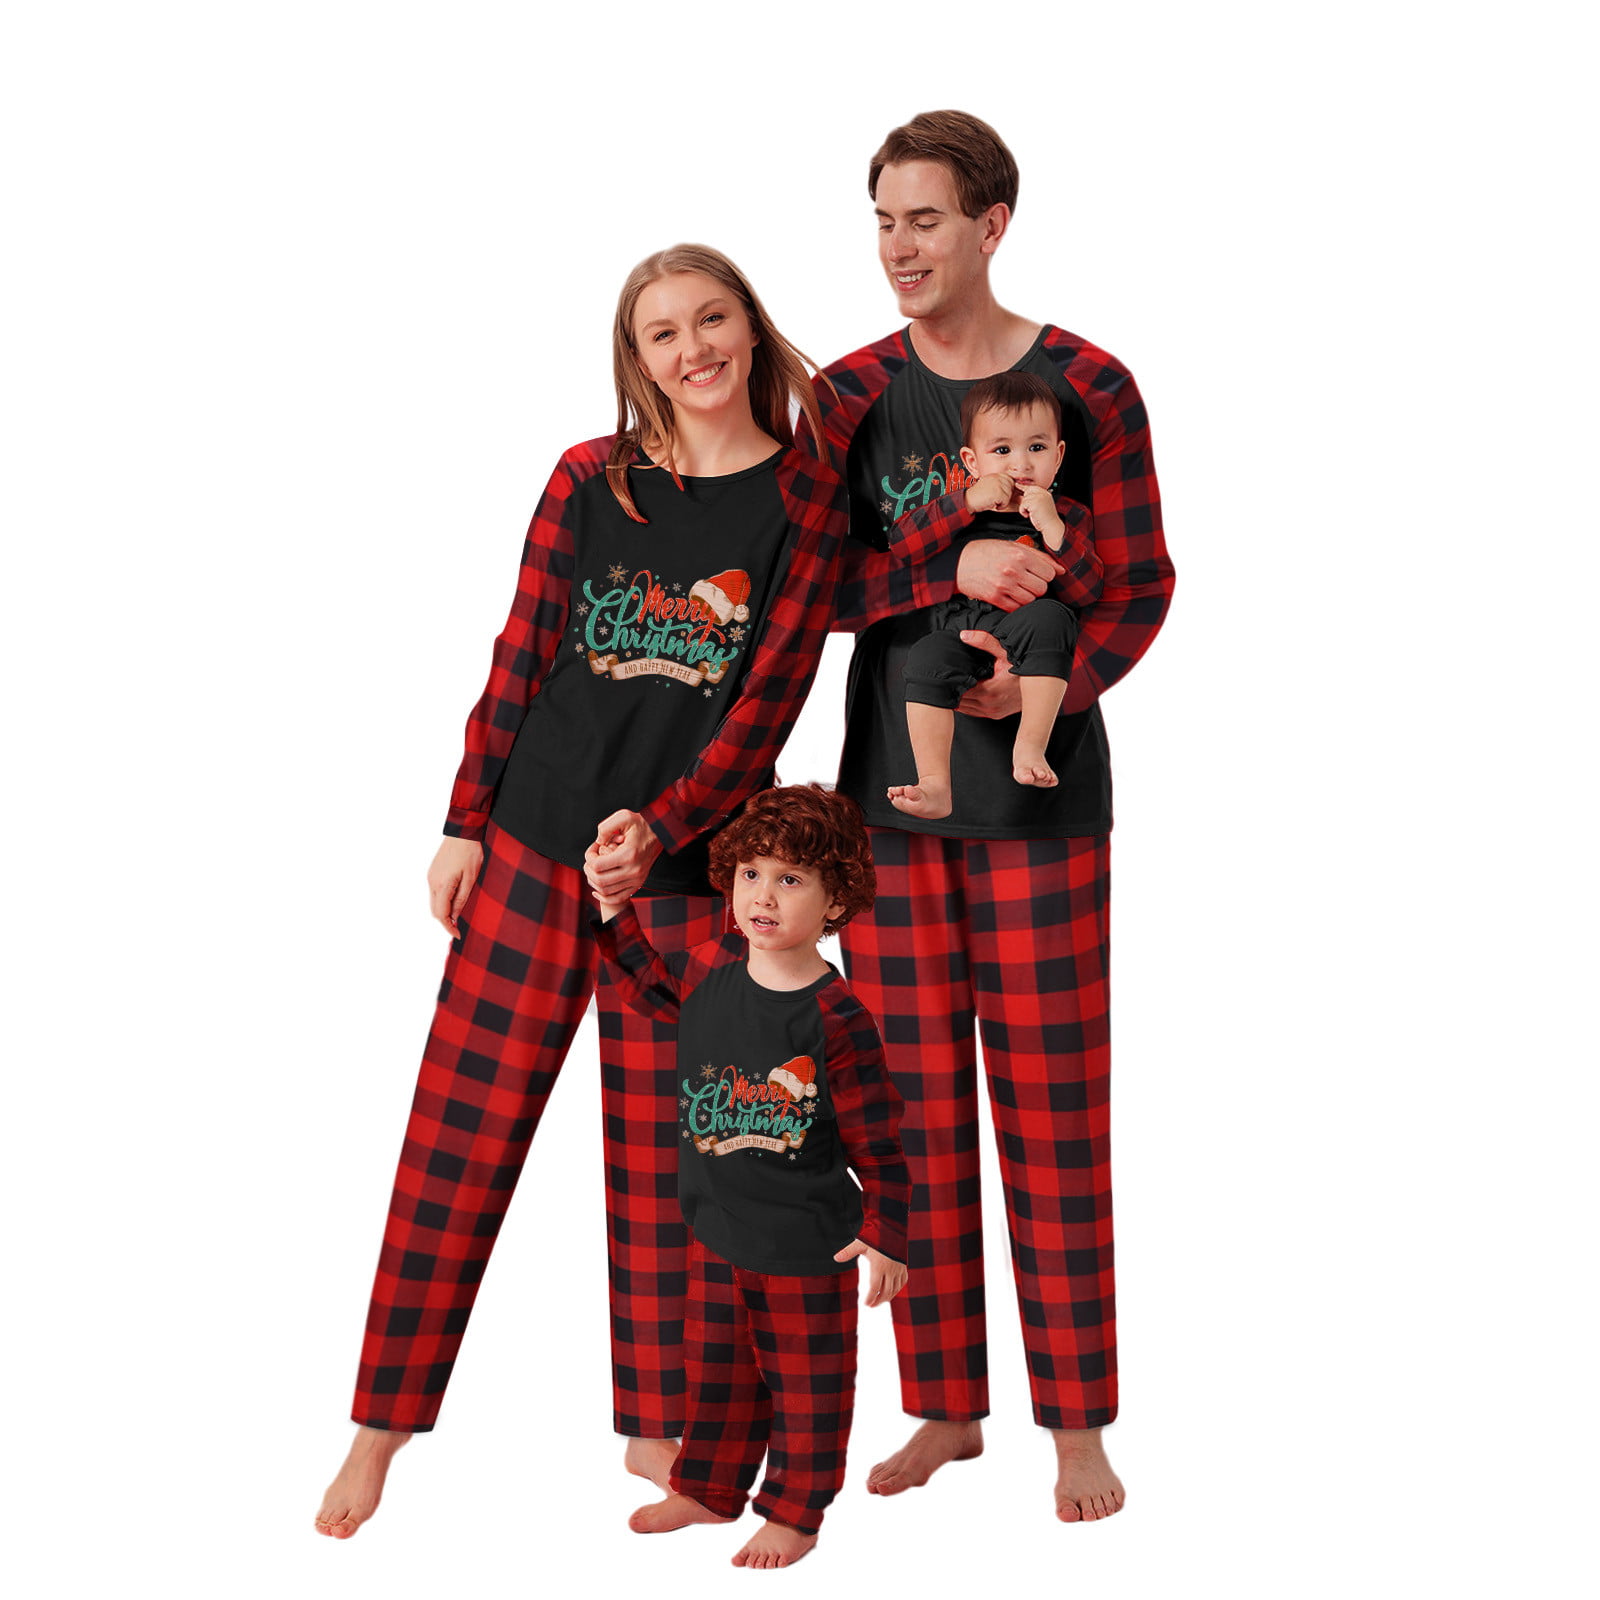 Christmas Pjs Family Matching Sleepwear Knit Holiday Mix Match Pajamas PJs Collection Tops and Long Pants Sleepwear Outfits